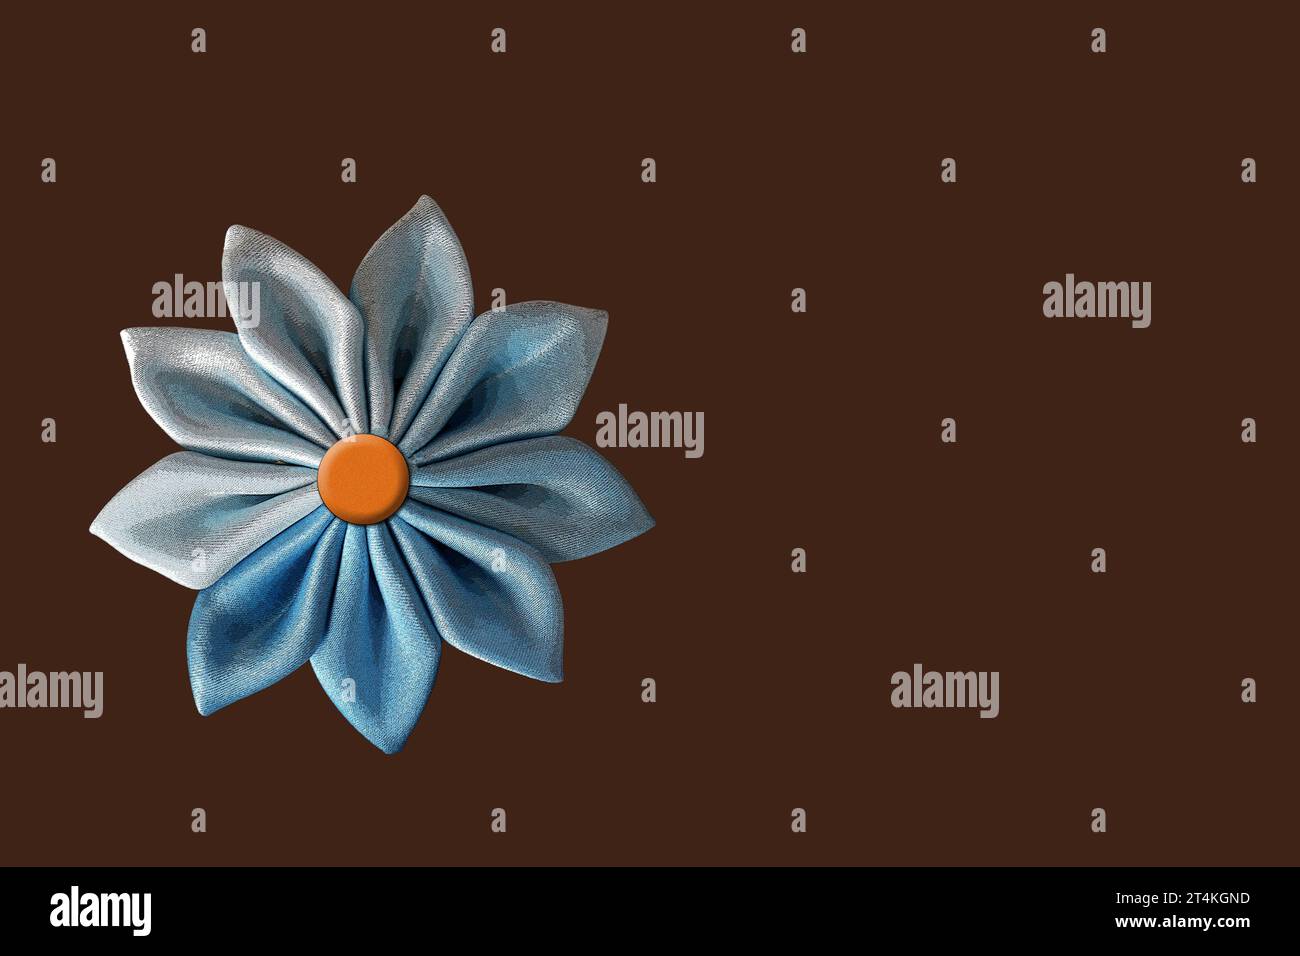 Blue fabric flower illustration isolated on brown background with copy space Stock Photo